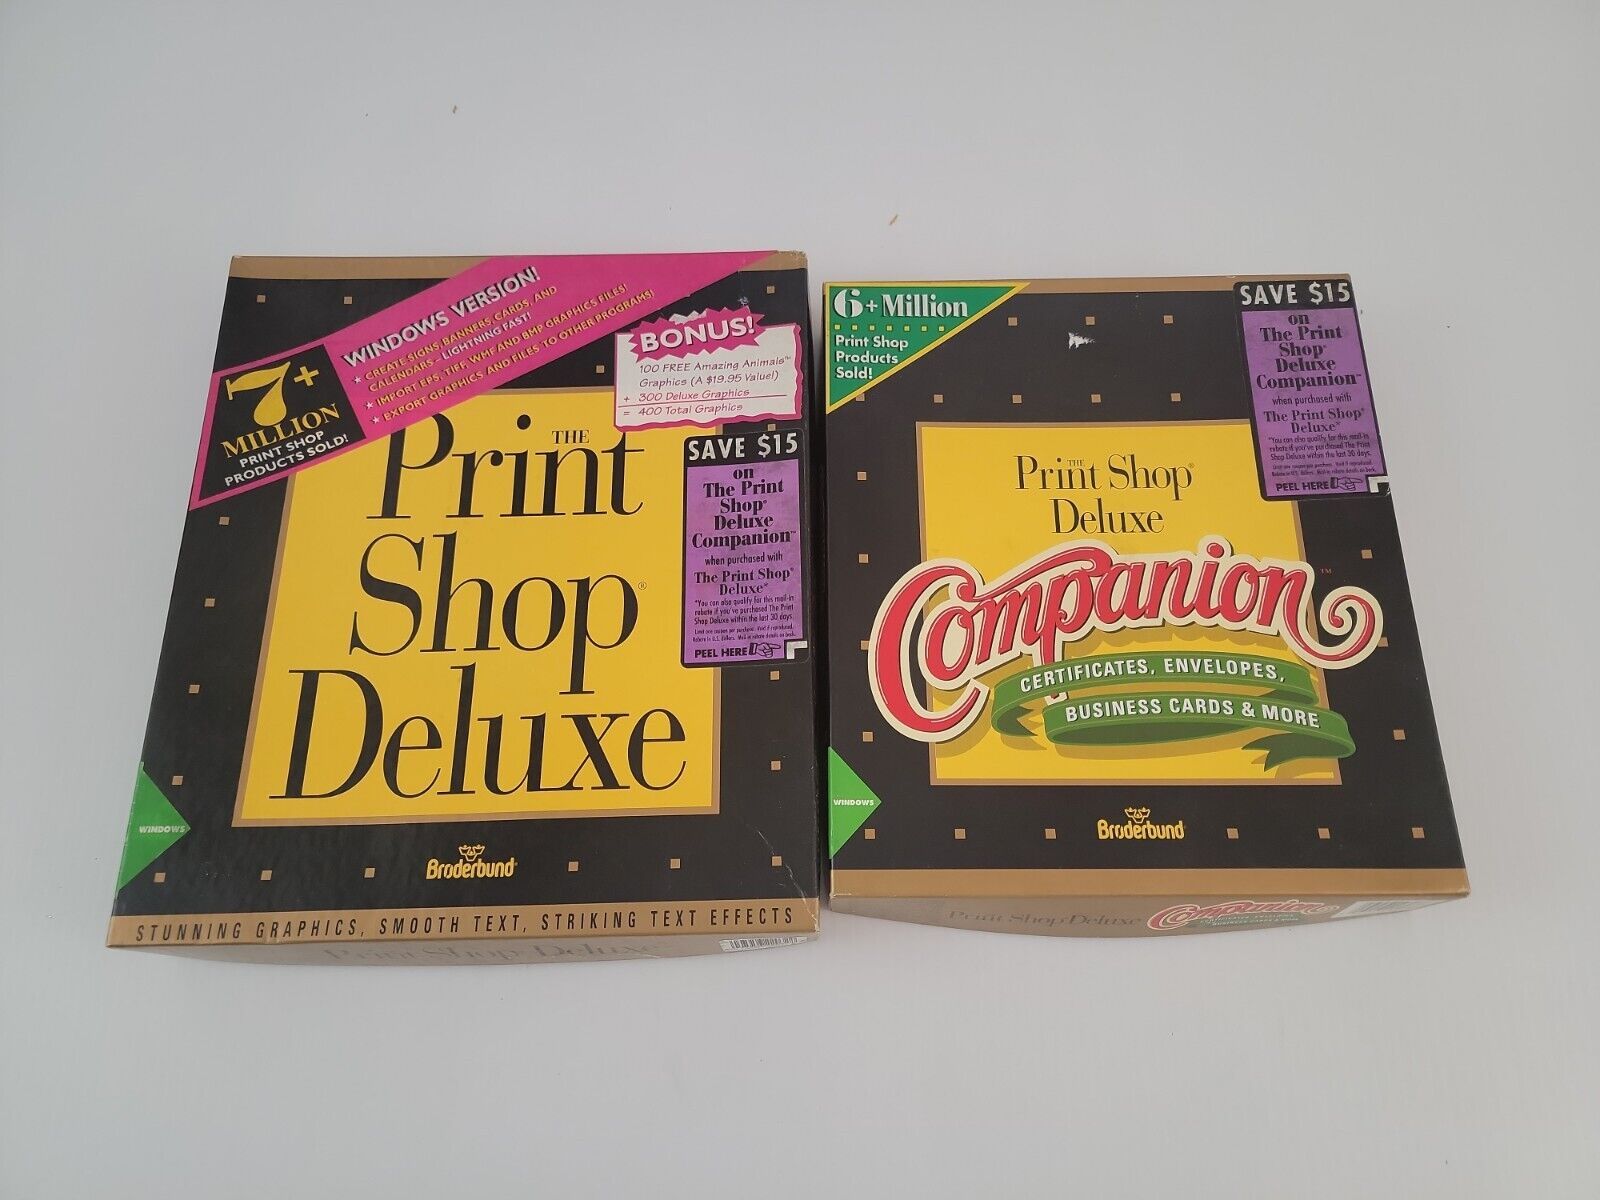 Broderbund THE PRINT SHOP DELUXE and Companion For Windows PC BIG BOX 3.5 Disk